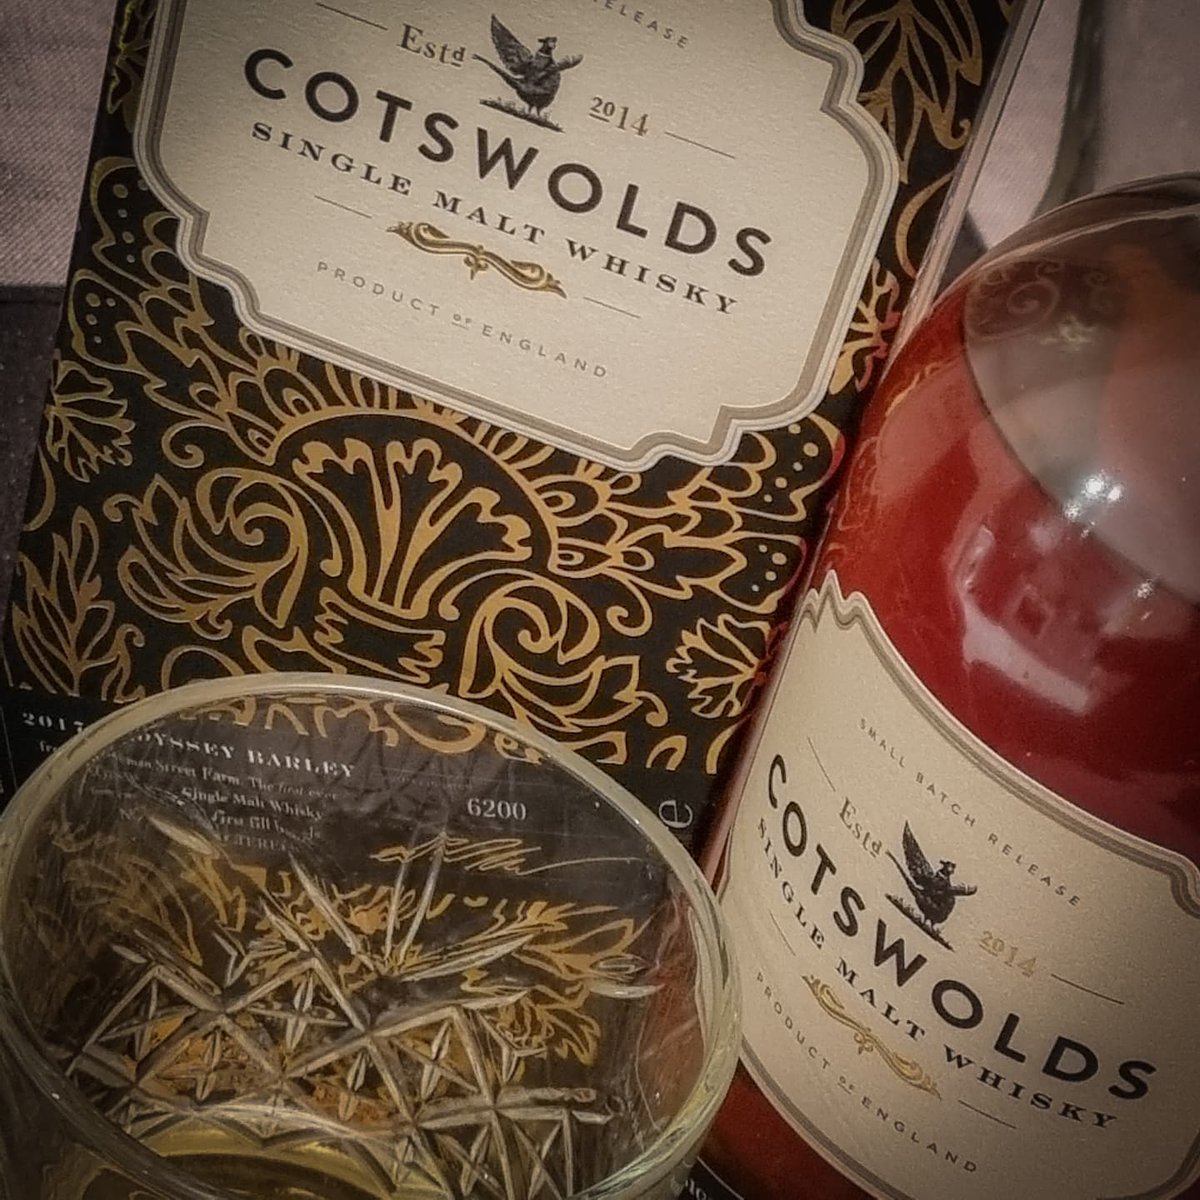 Well..... Hello .. I'm in Devon for a few days with family and I was given this bottle of whisky. Its 😋 delicious. Deep deep taste of sweet orange. Amazing finish of fruits and treacle. #cotswalds #cotswoldswhisky #cotswoldssinglemalt #whiskytasting #whiskeylover #whiskeytalks